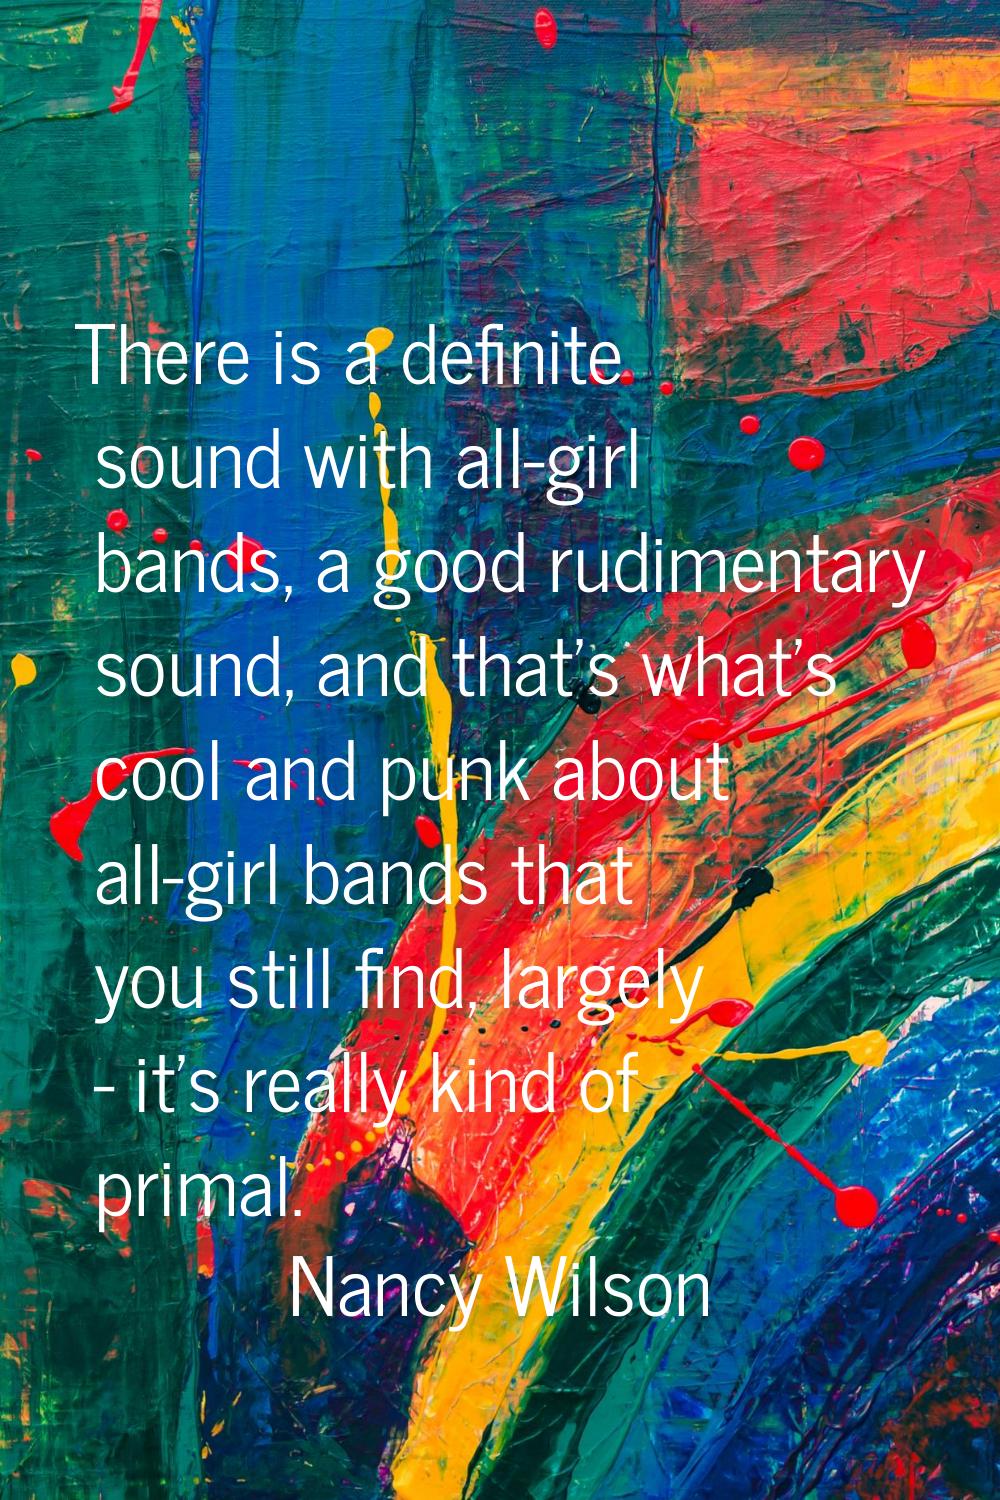 There is a definite sound with all-girl bands, a good rudimentary sound, and that's what's cool and